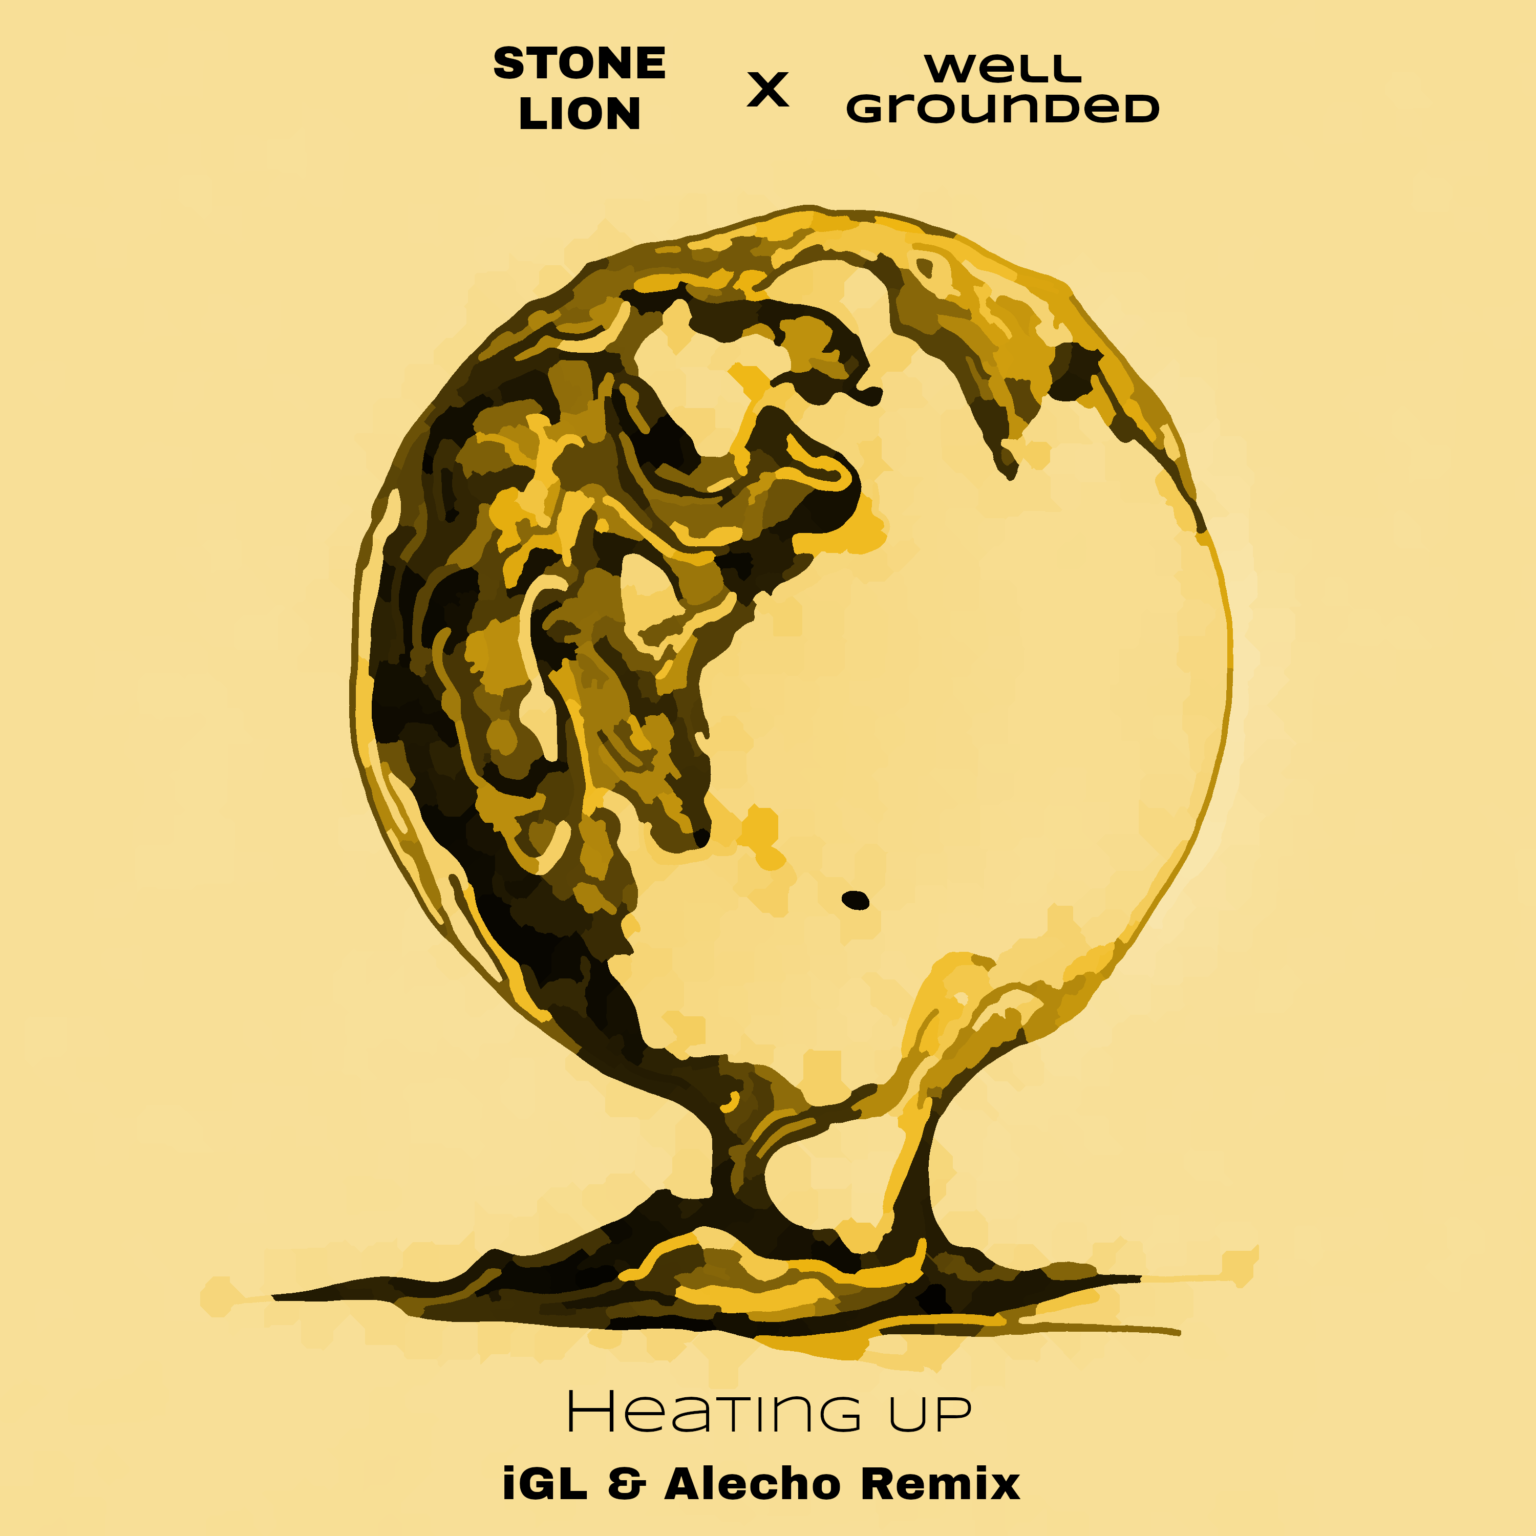 Cover art for 'Heating Up (iGL & Alecho Remix)' by Stone Lion x Well Grounded.